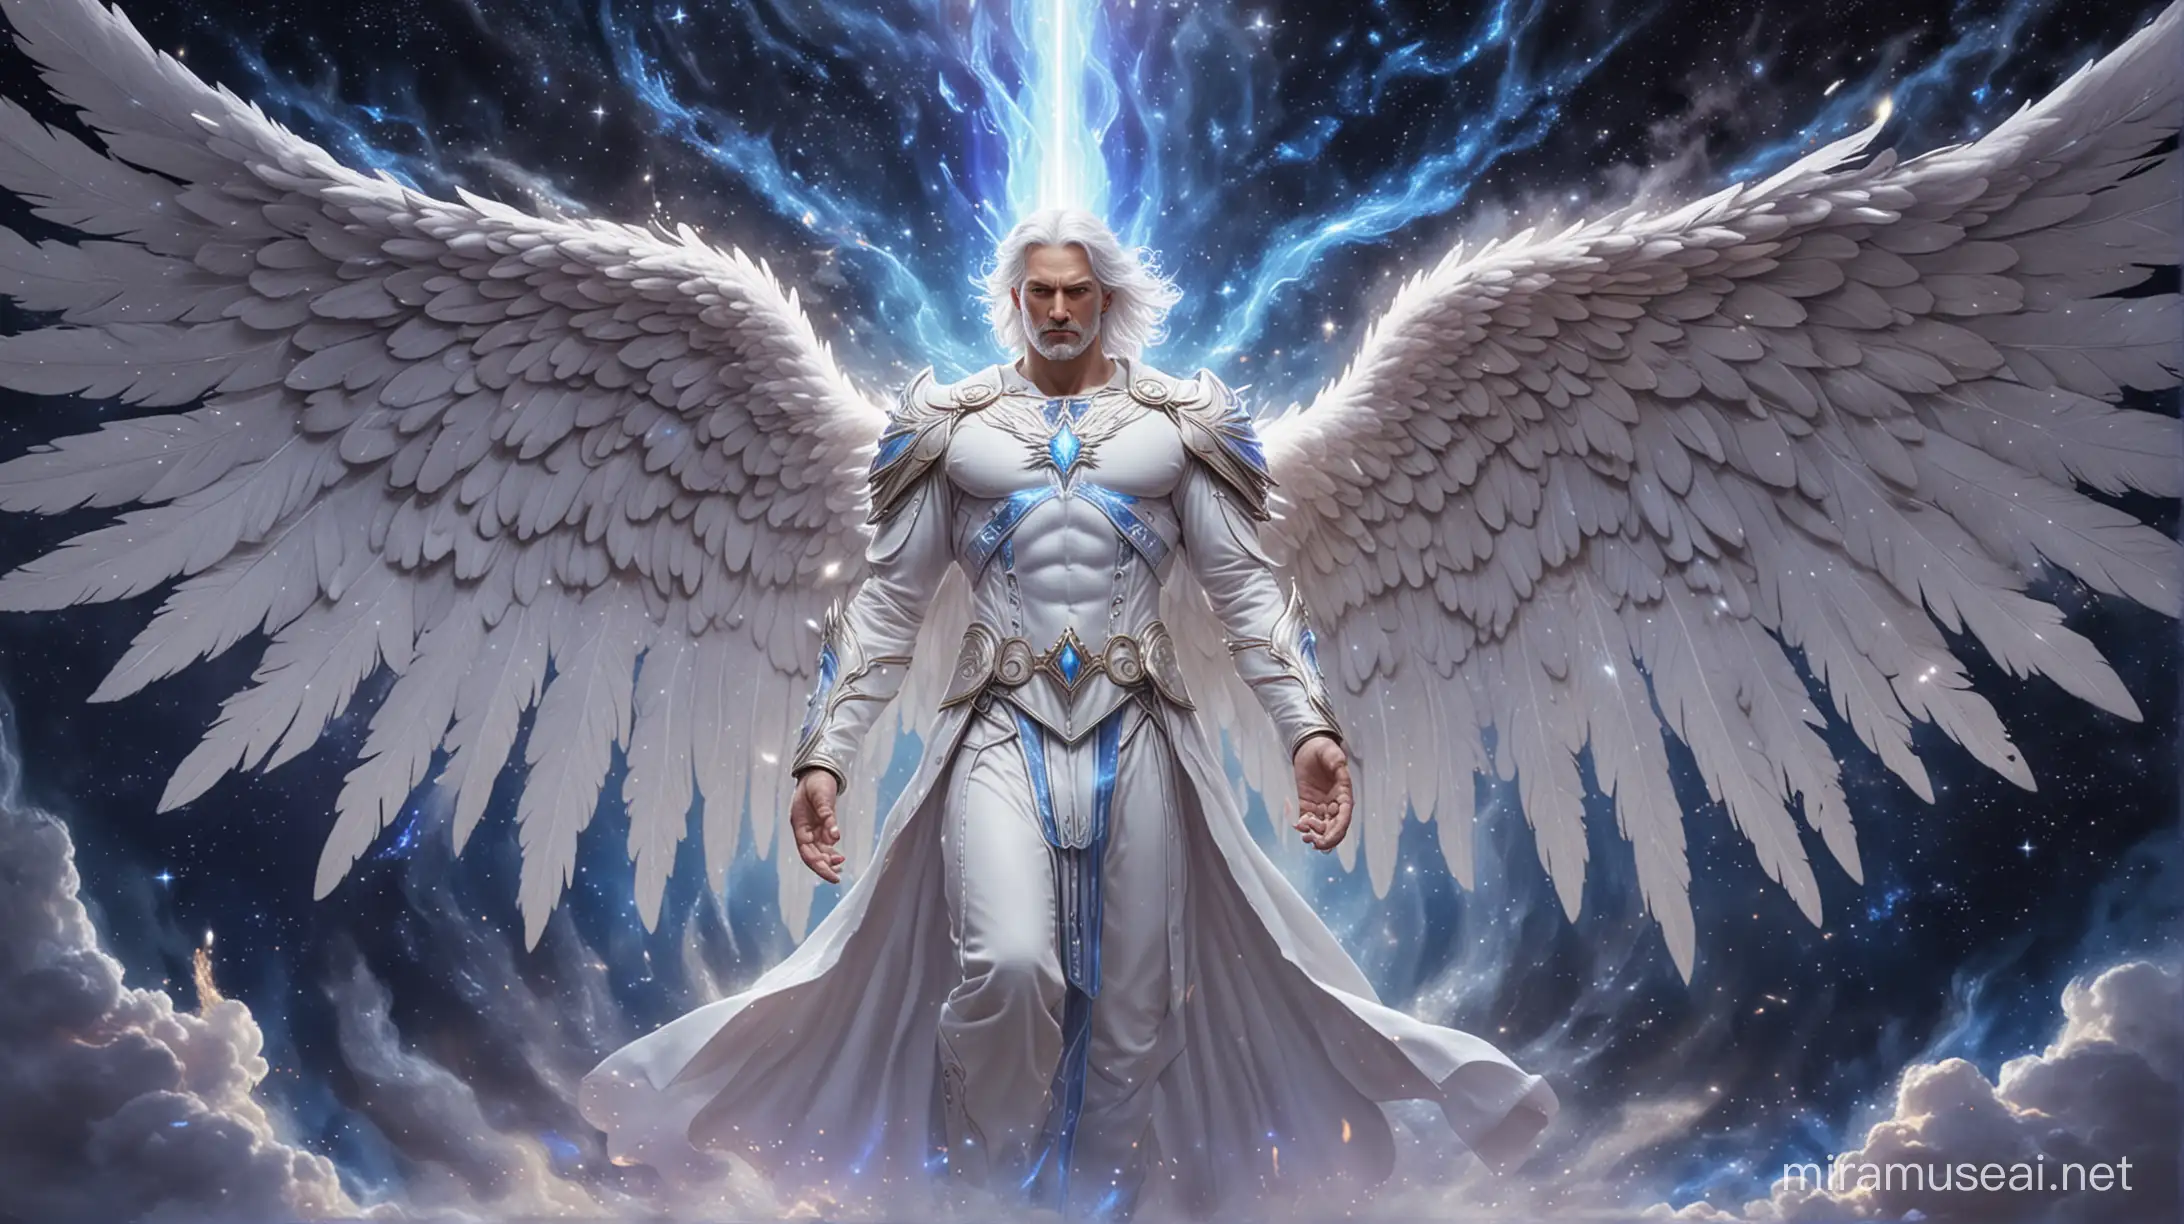 Powerful Guardian Angel with Glowing Blue Flames Wings Against Starry Sky